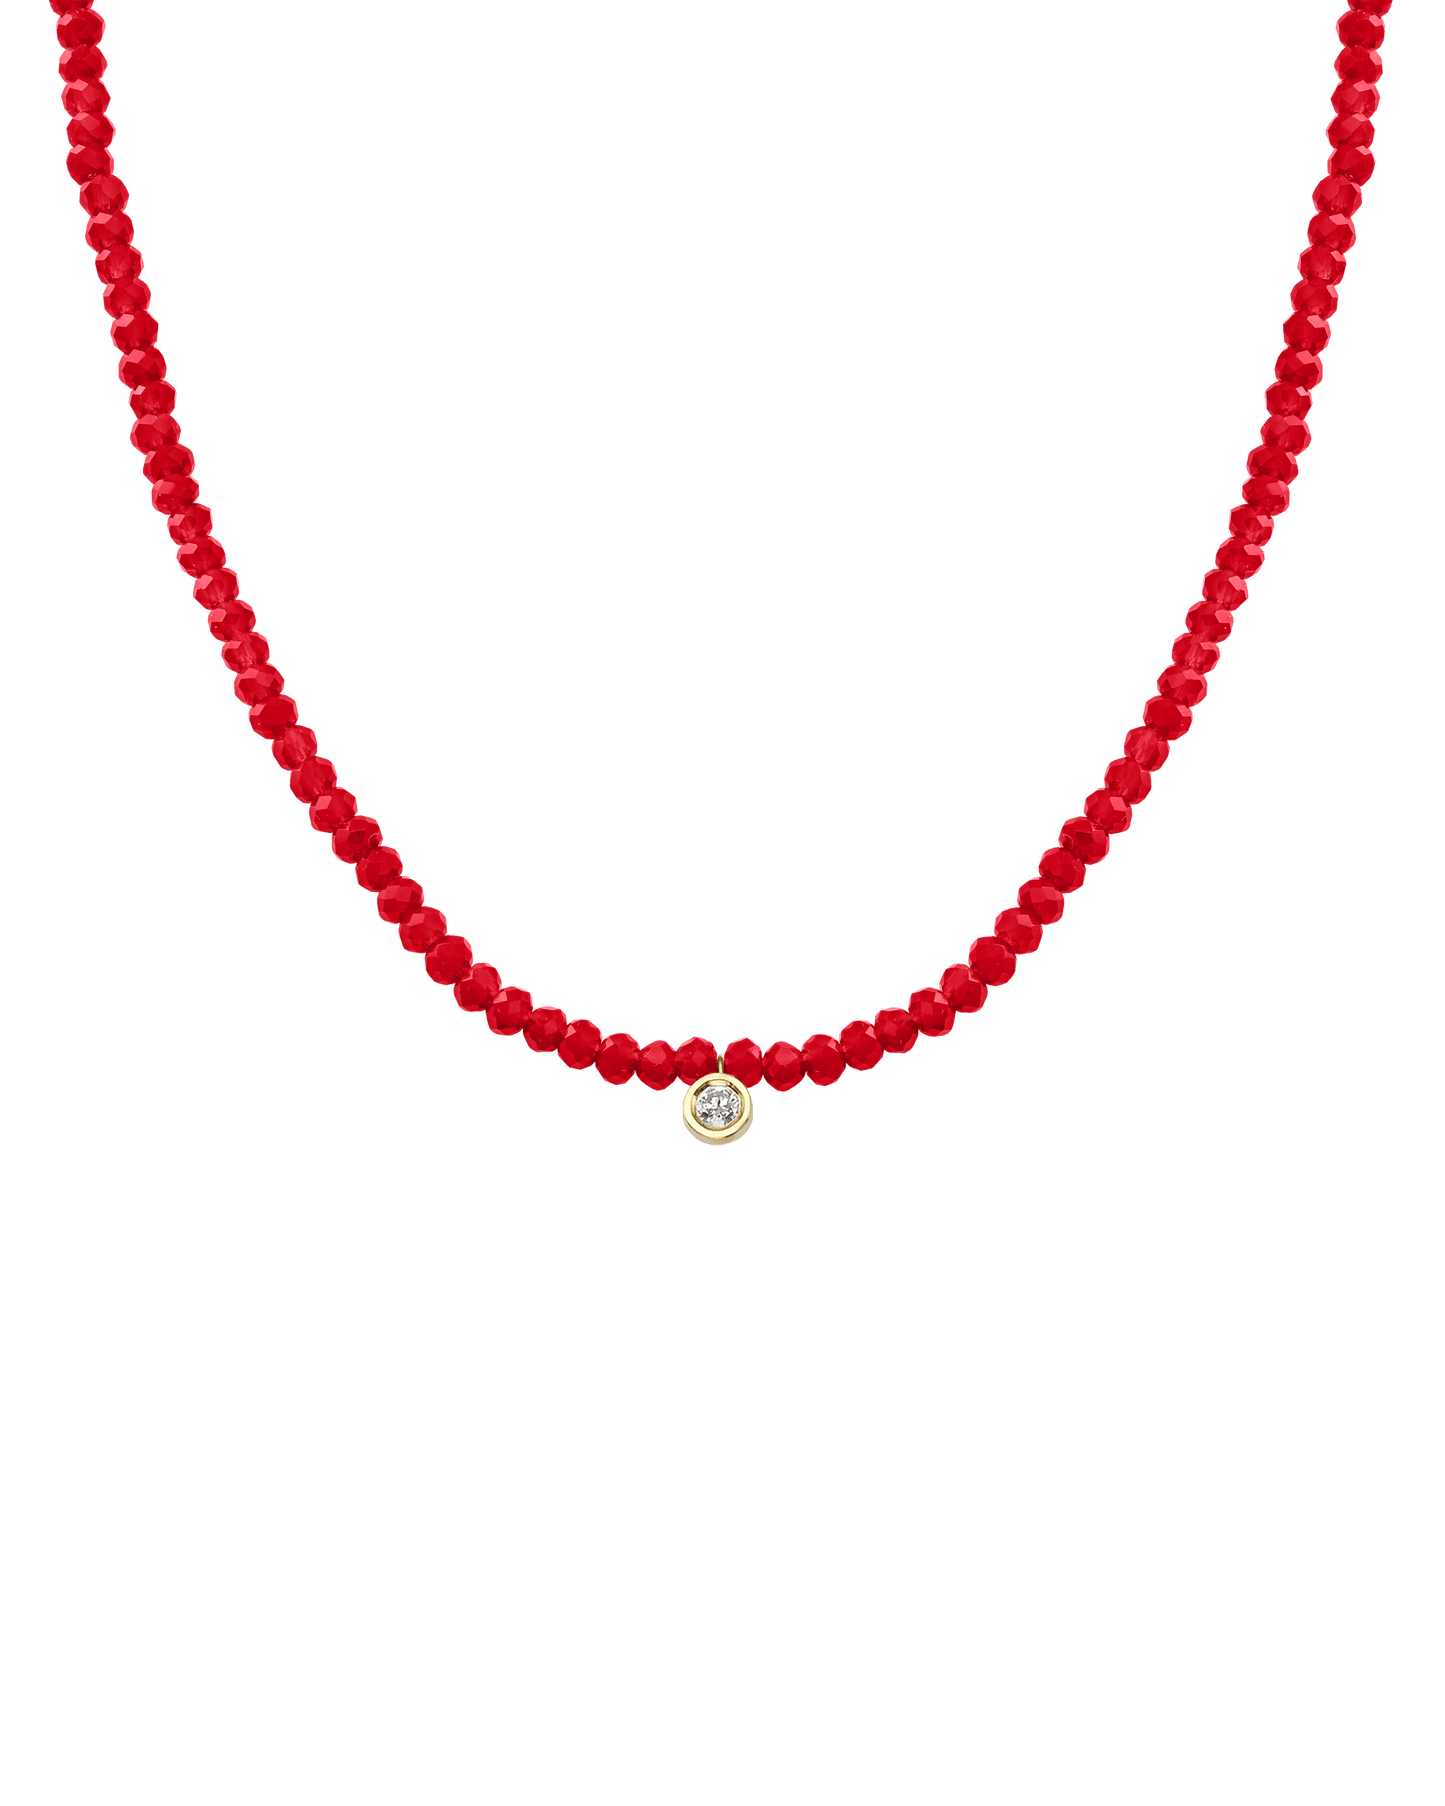 The Gemstone & Diamond Necklace - 14K Yellow Gold Necklaces 14K Solid Gold Natural Red Jade Medium: 0.04ct 14"